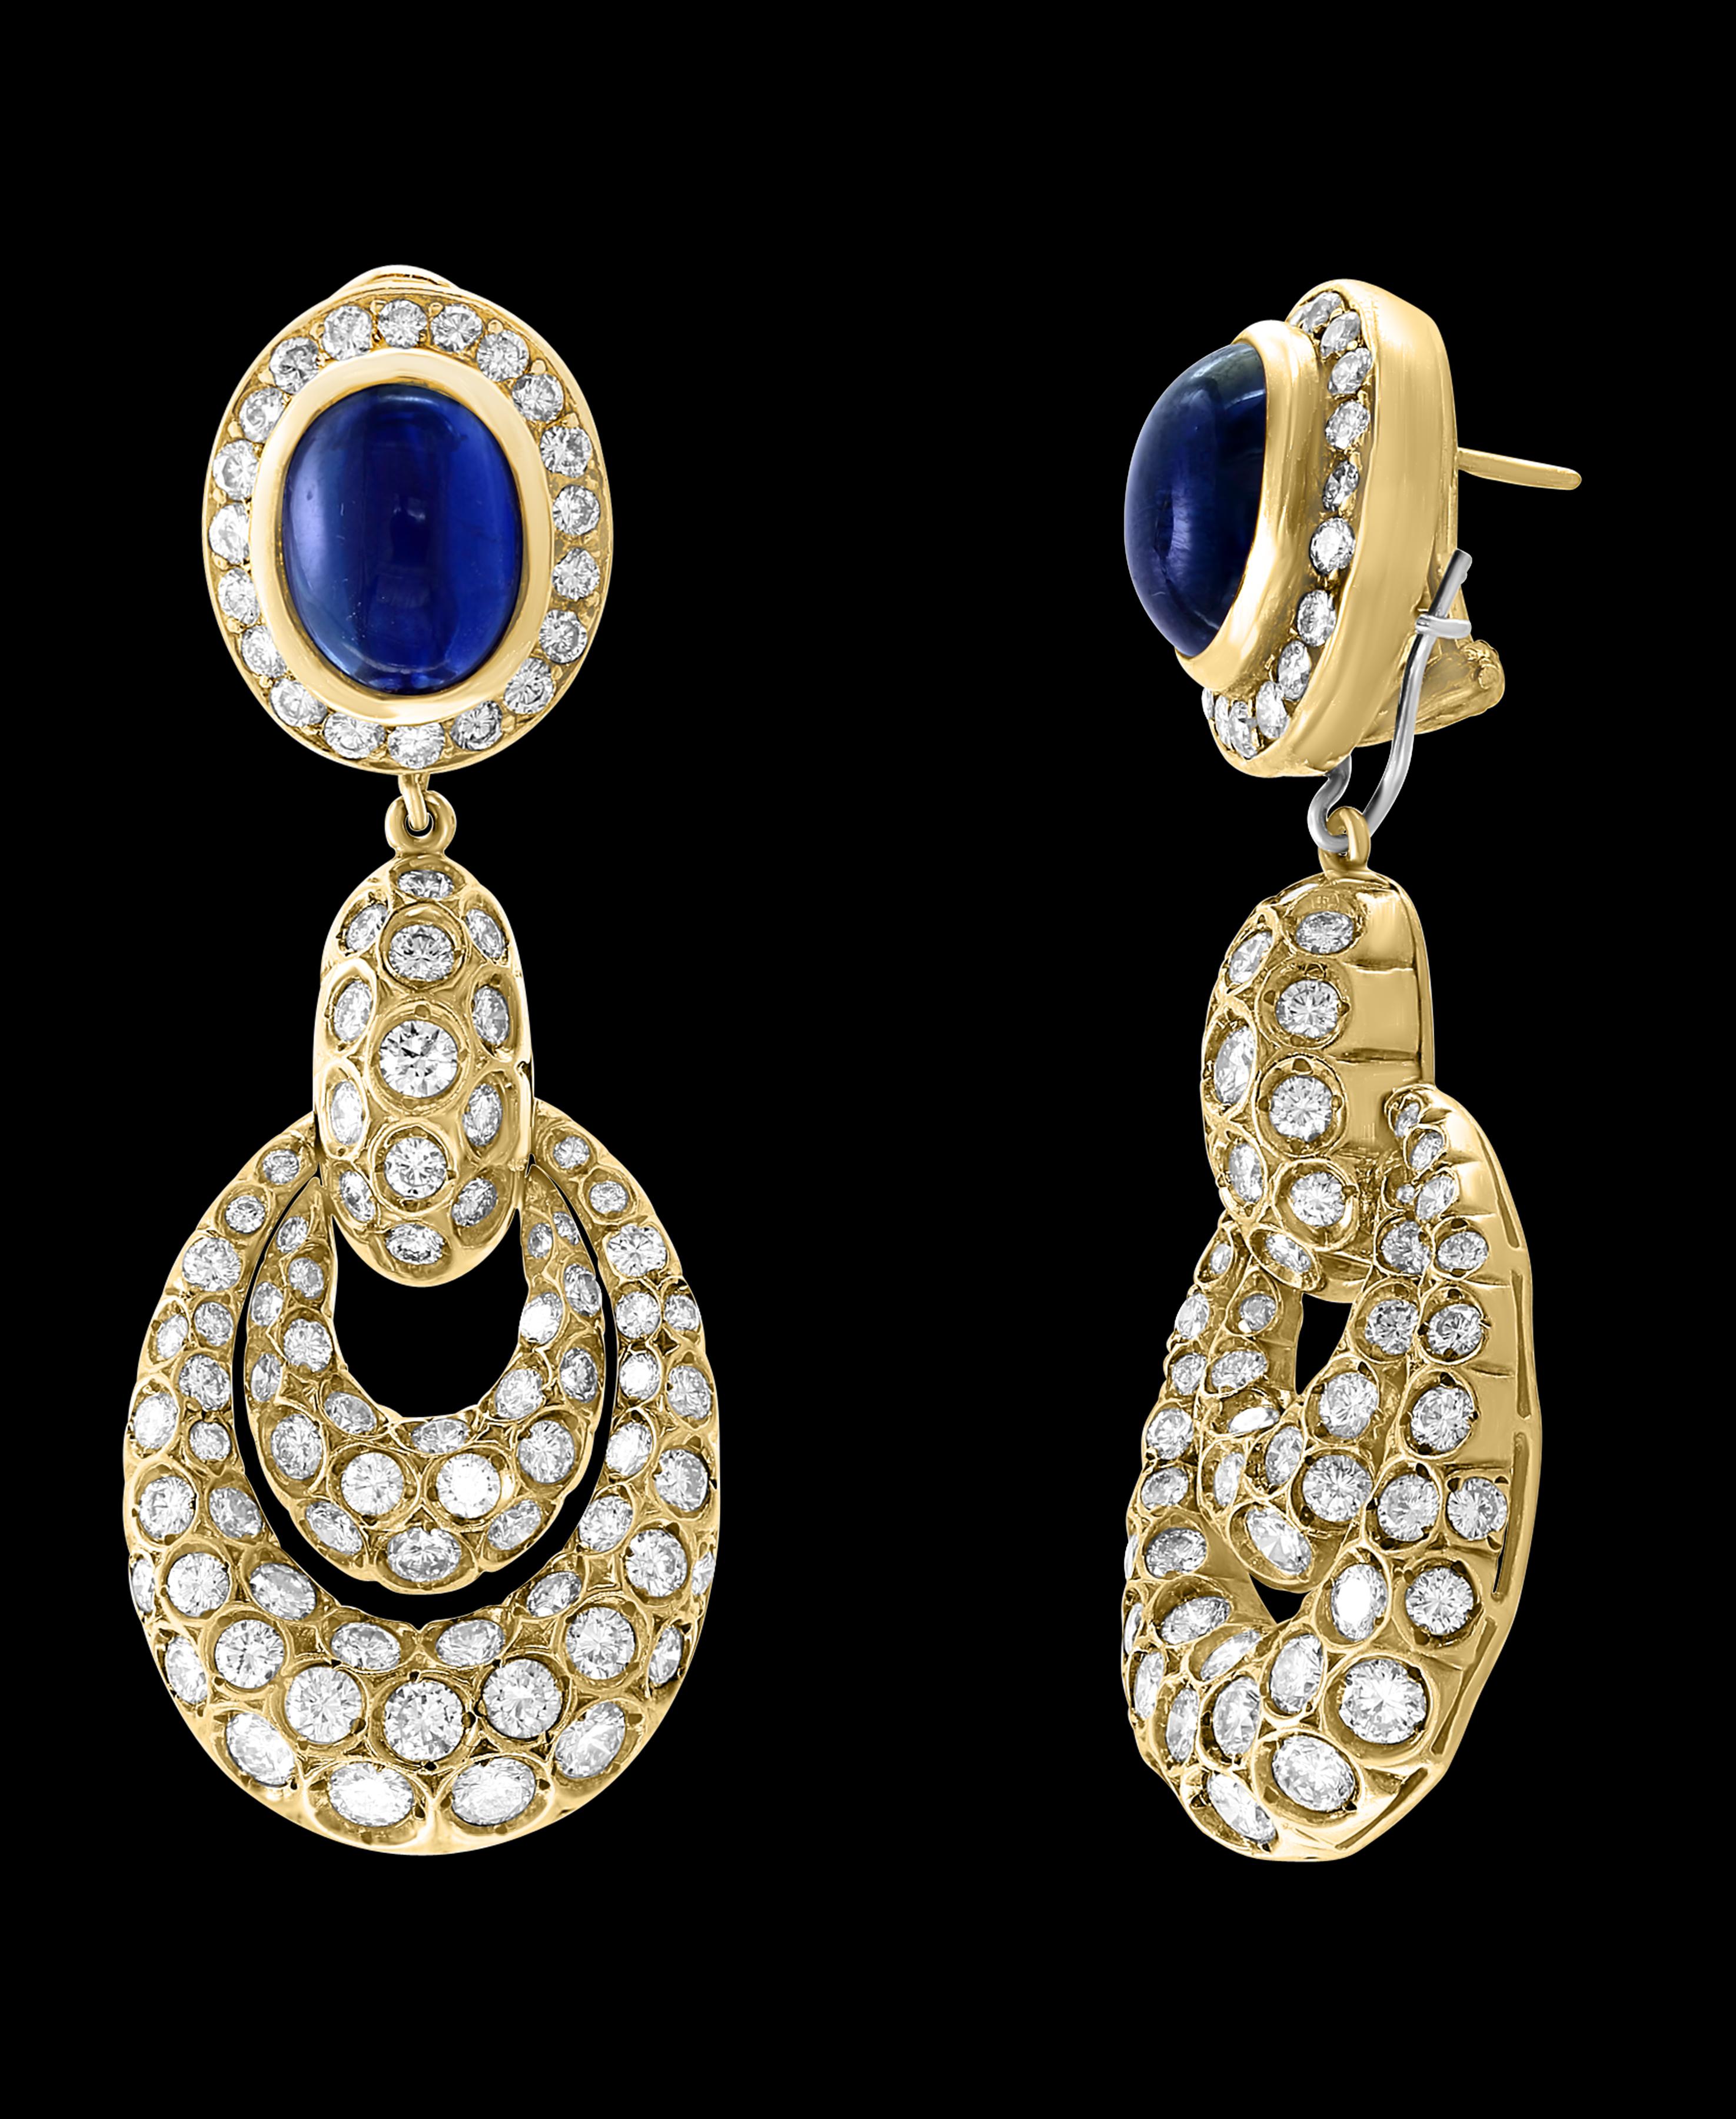 Oval Cut 15 Carat Blue Sapphire and Diamond Hanging /Cocktail/Drop Earring 18 Karat Gold For Sale